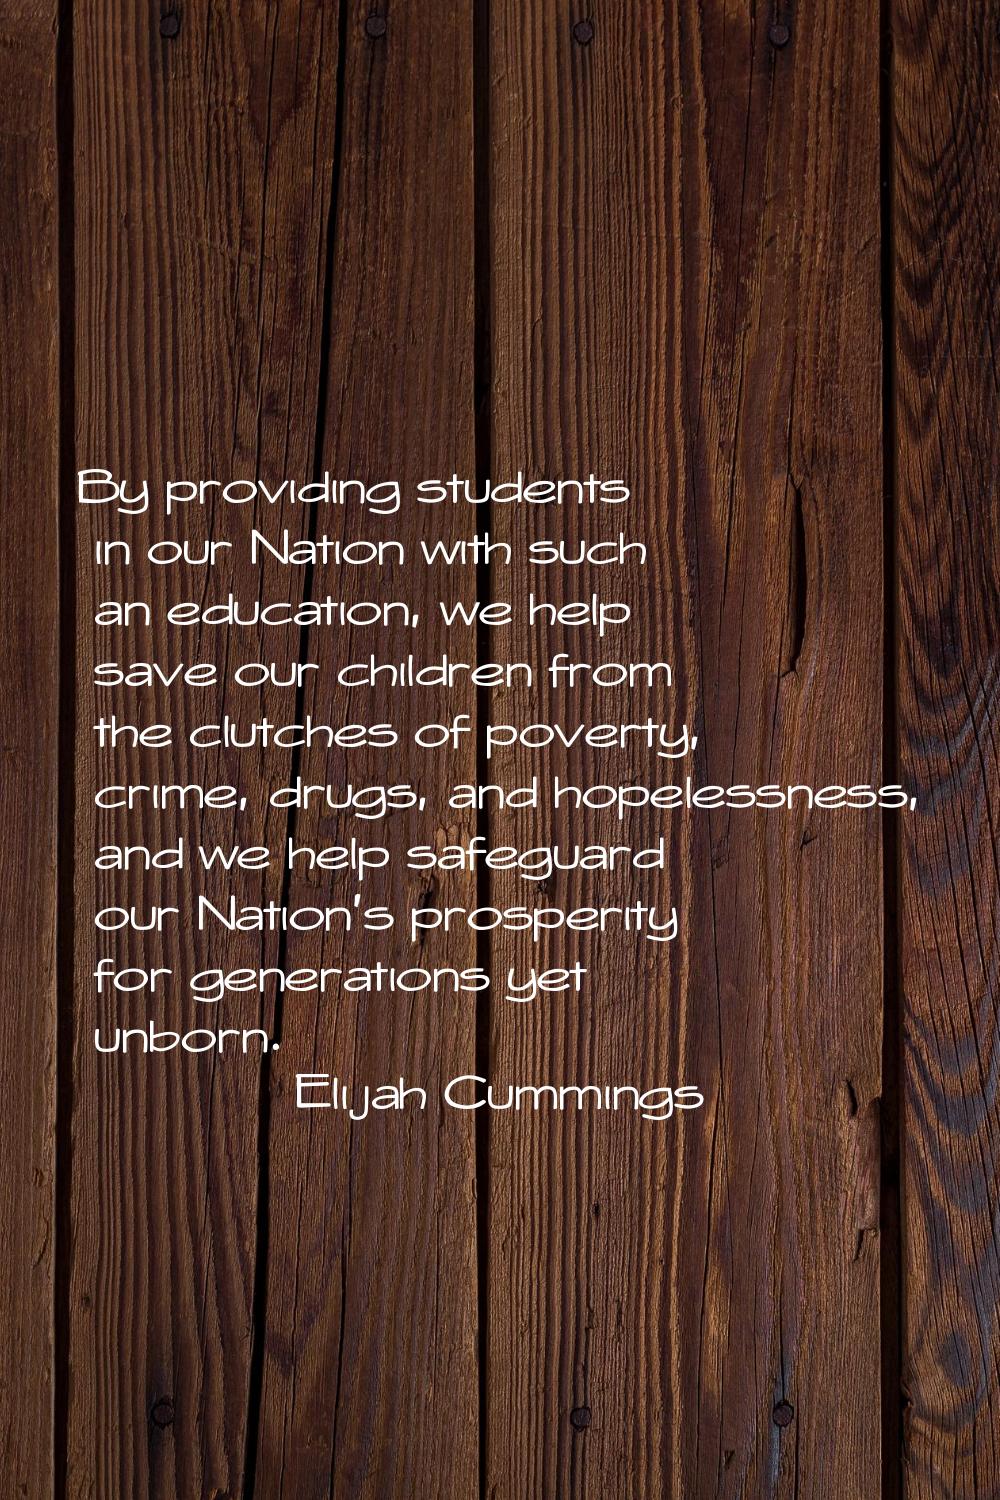 By providing students in our Nation with such an education, we help save our children from the clut